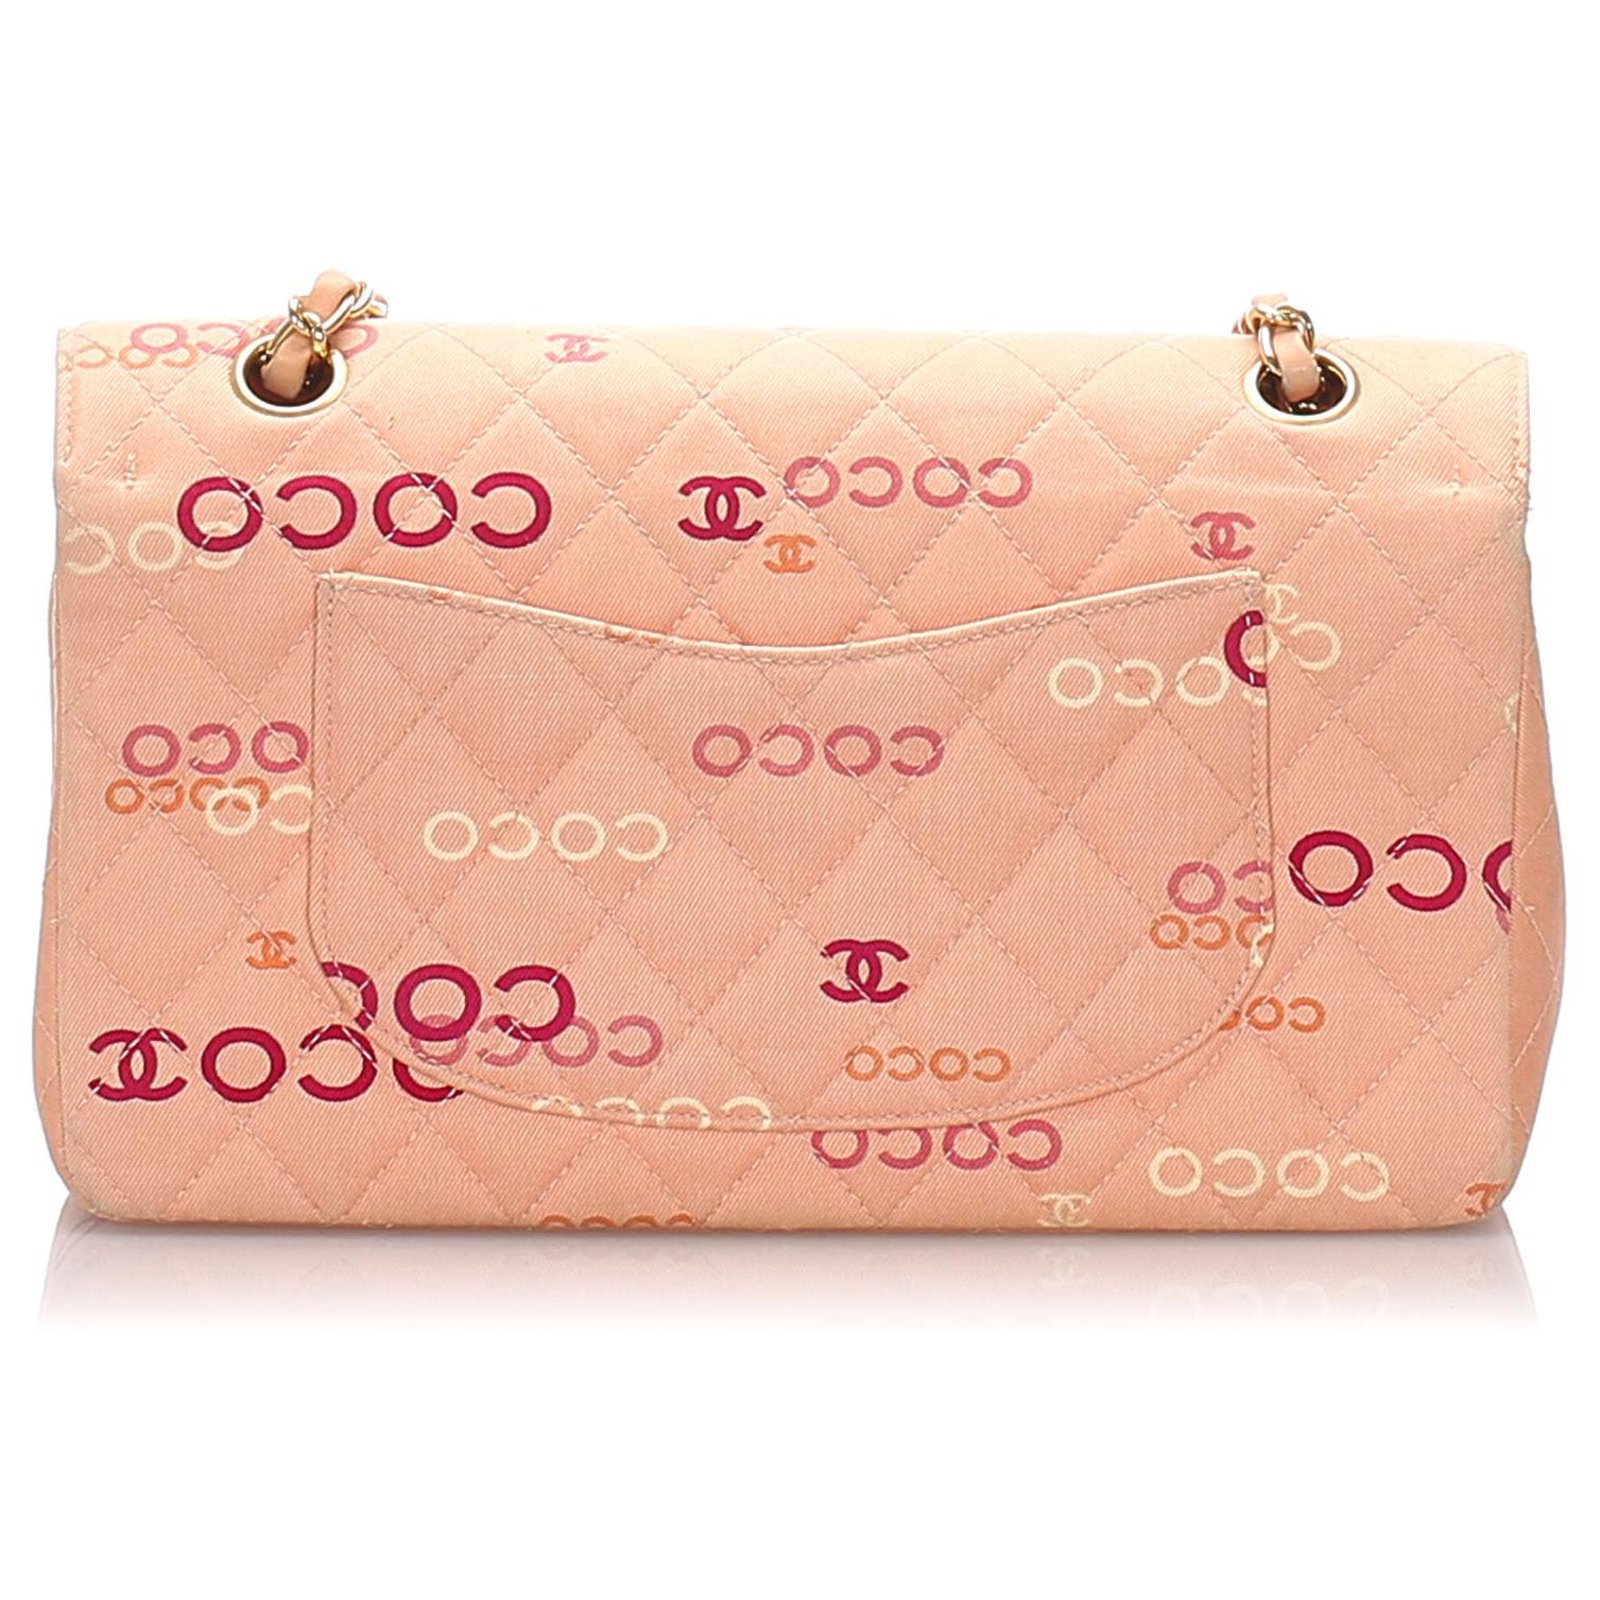 Chanel Pink Medium Coco Classic lined Flap Bag